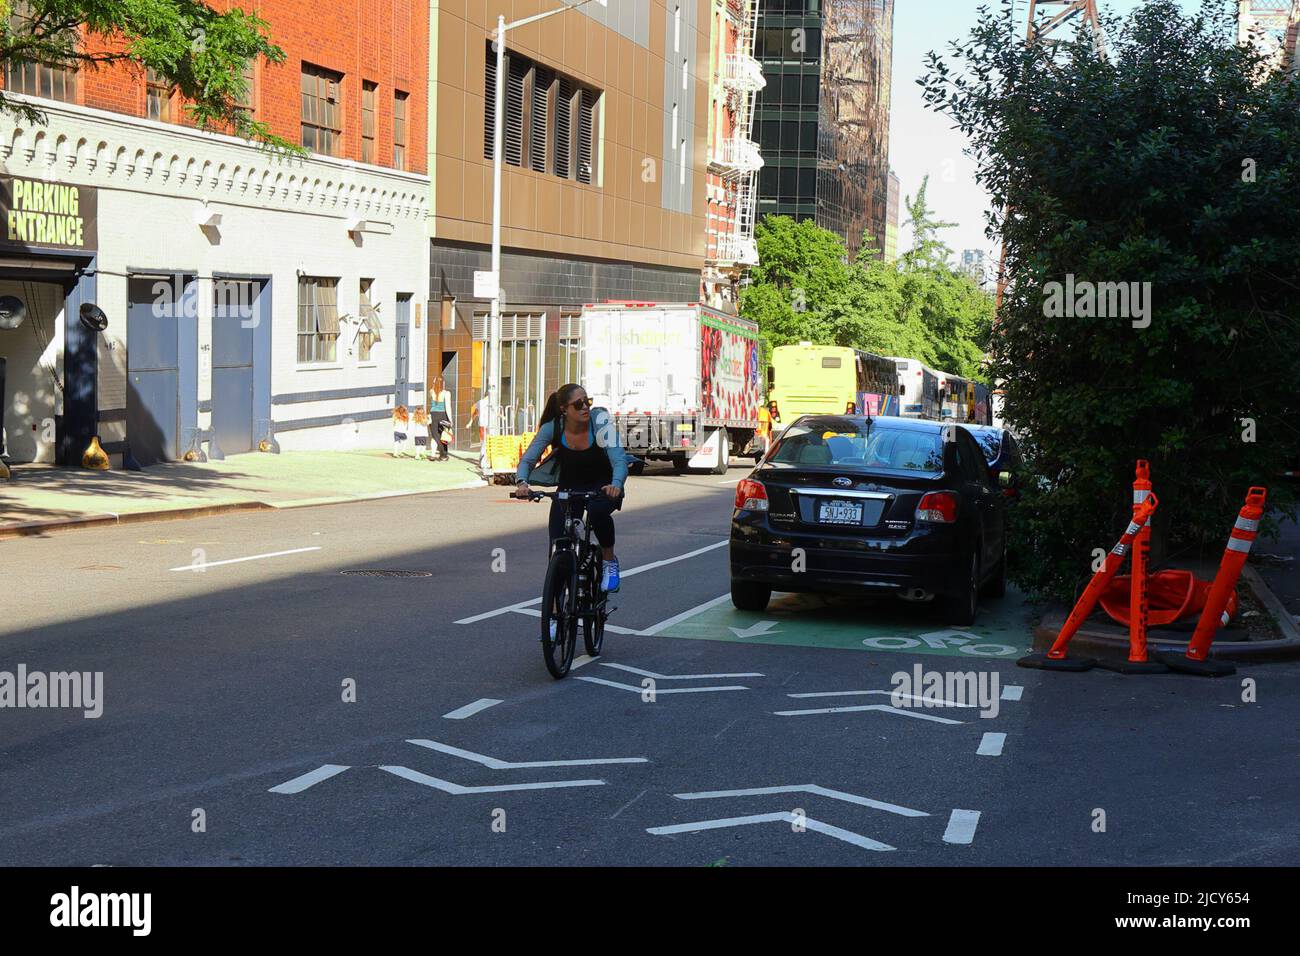 A bicyclist manuevers around several parked cars blocking a two-way bike lane in New York City. Stock Photo